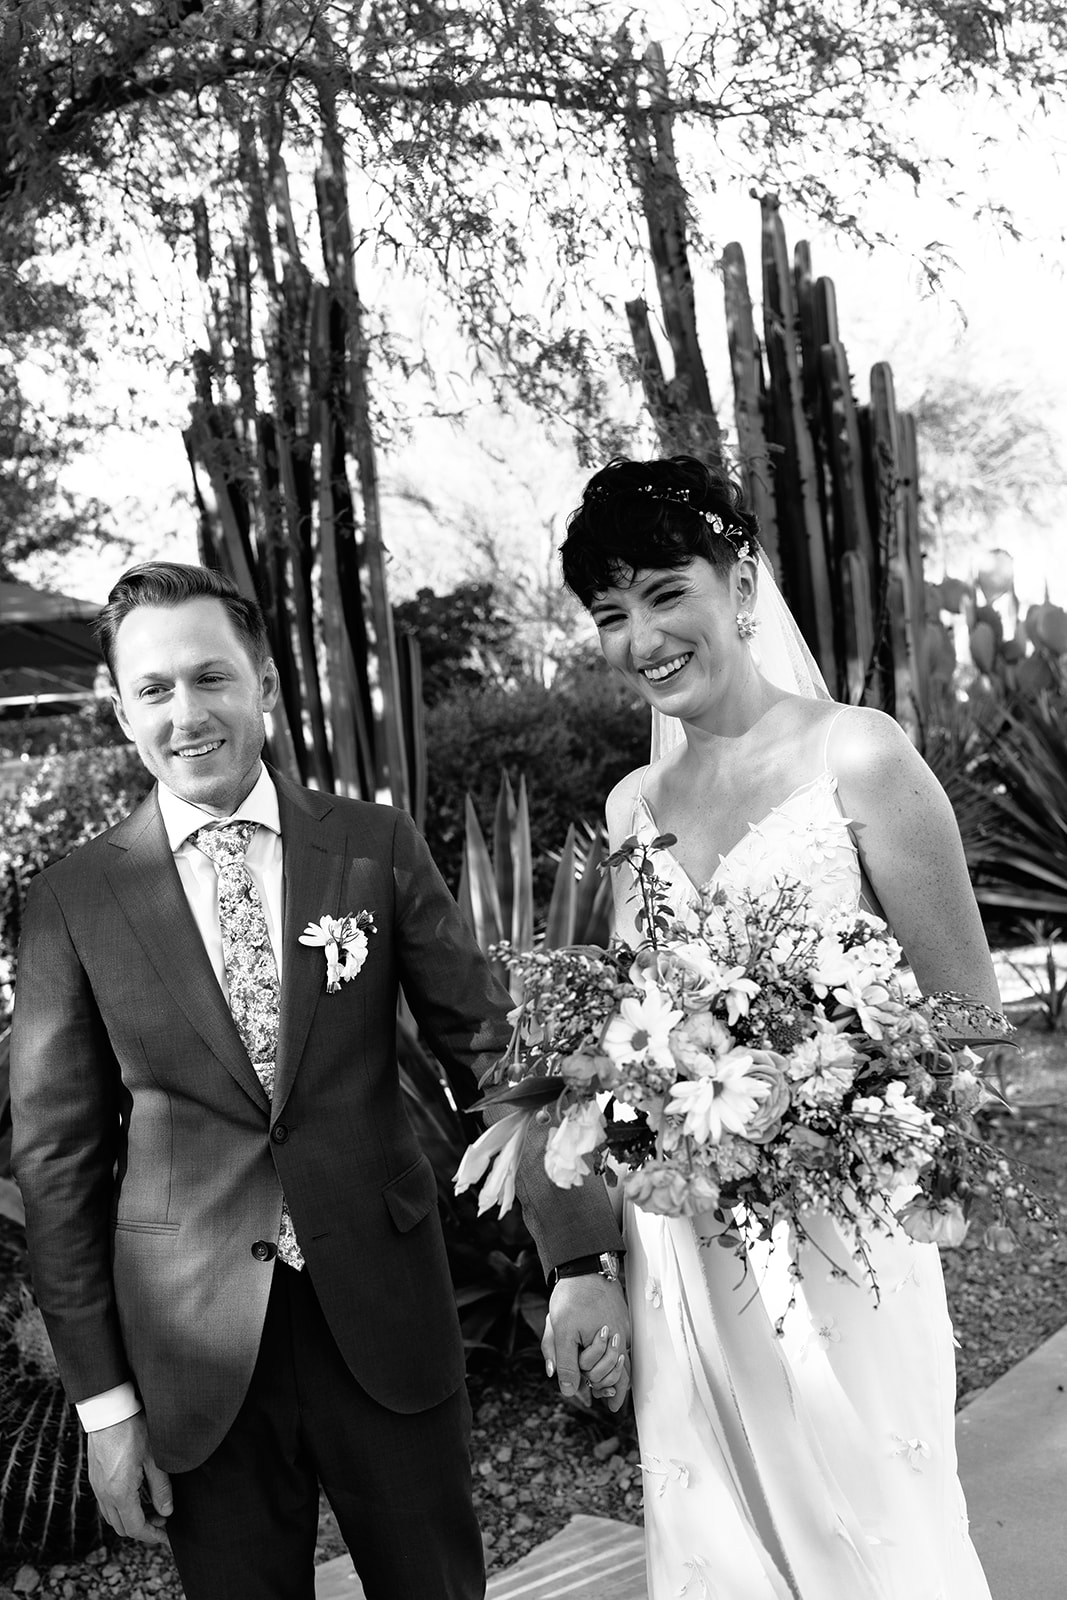 A bride and groom smile at each other outdoors. The bride holds a bouquet of flowers, and both are dressed in formal attire. Trees and tall plants are in the background.